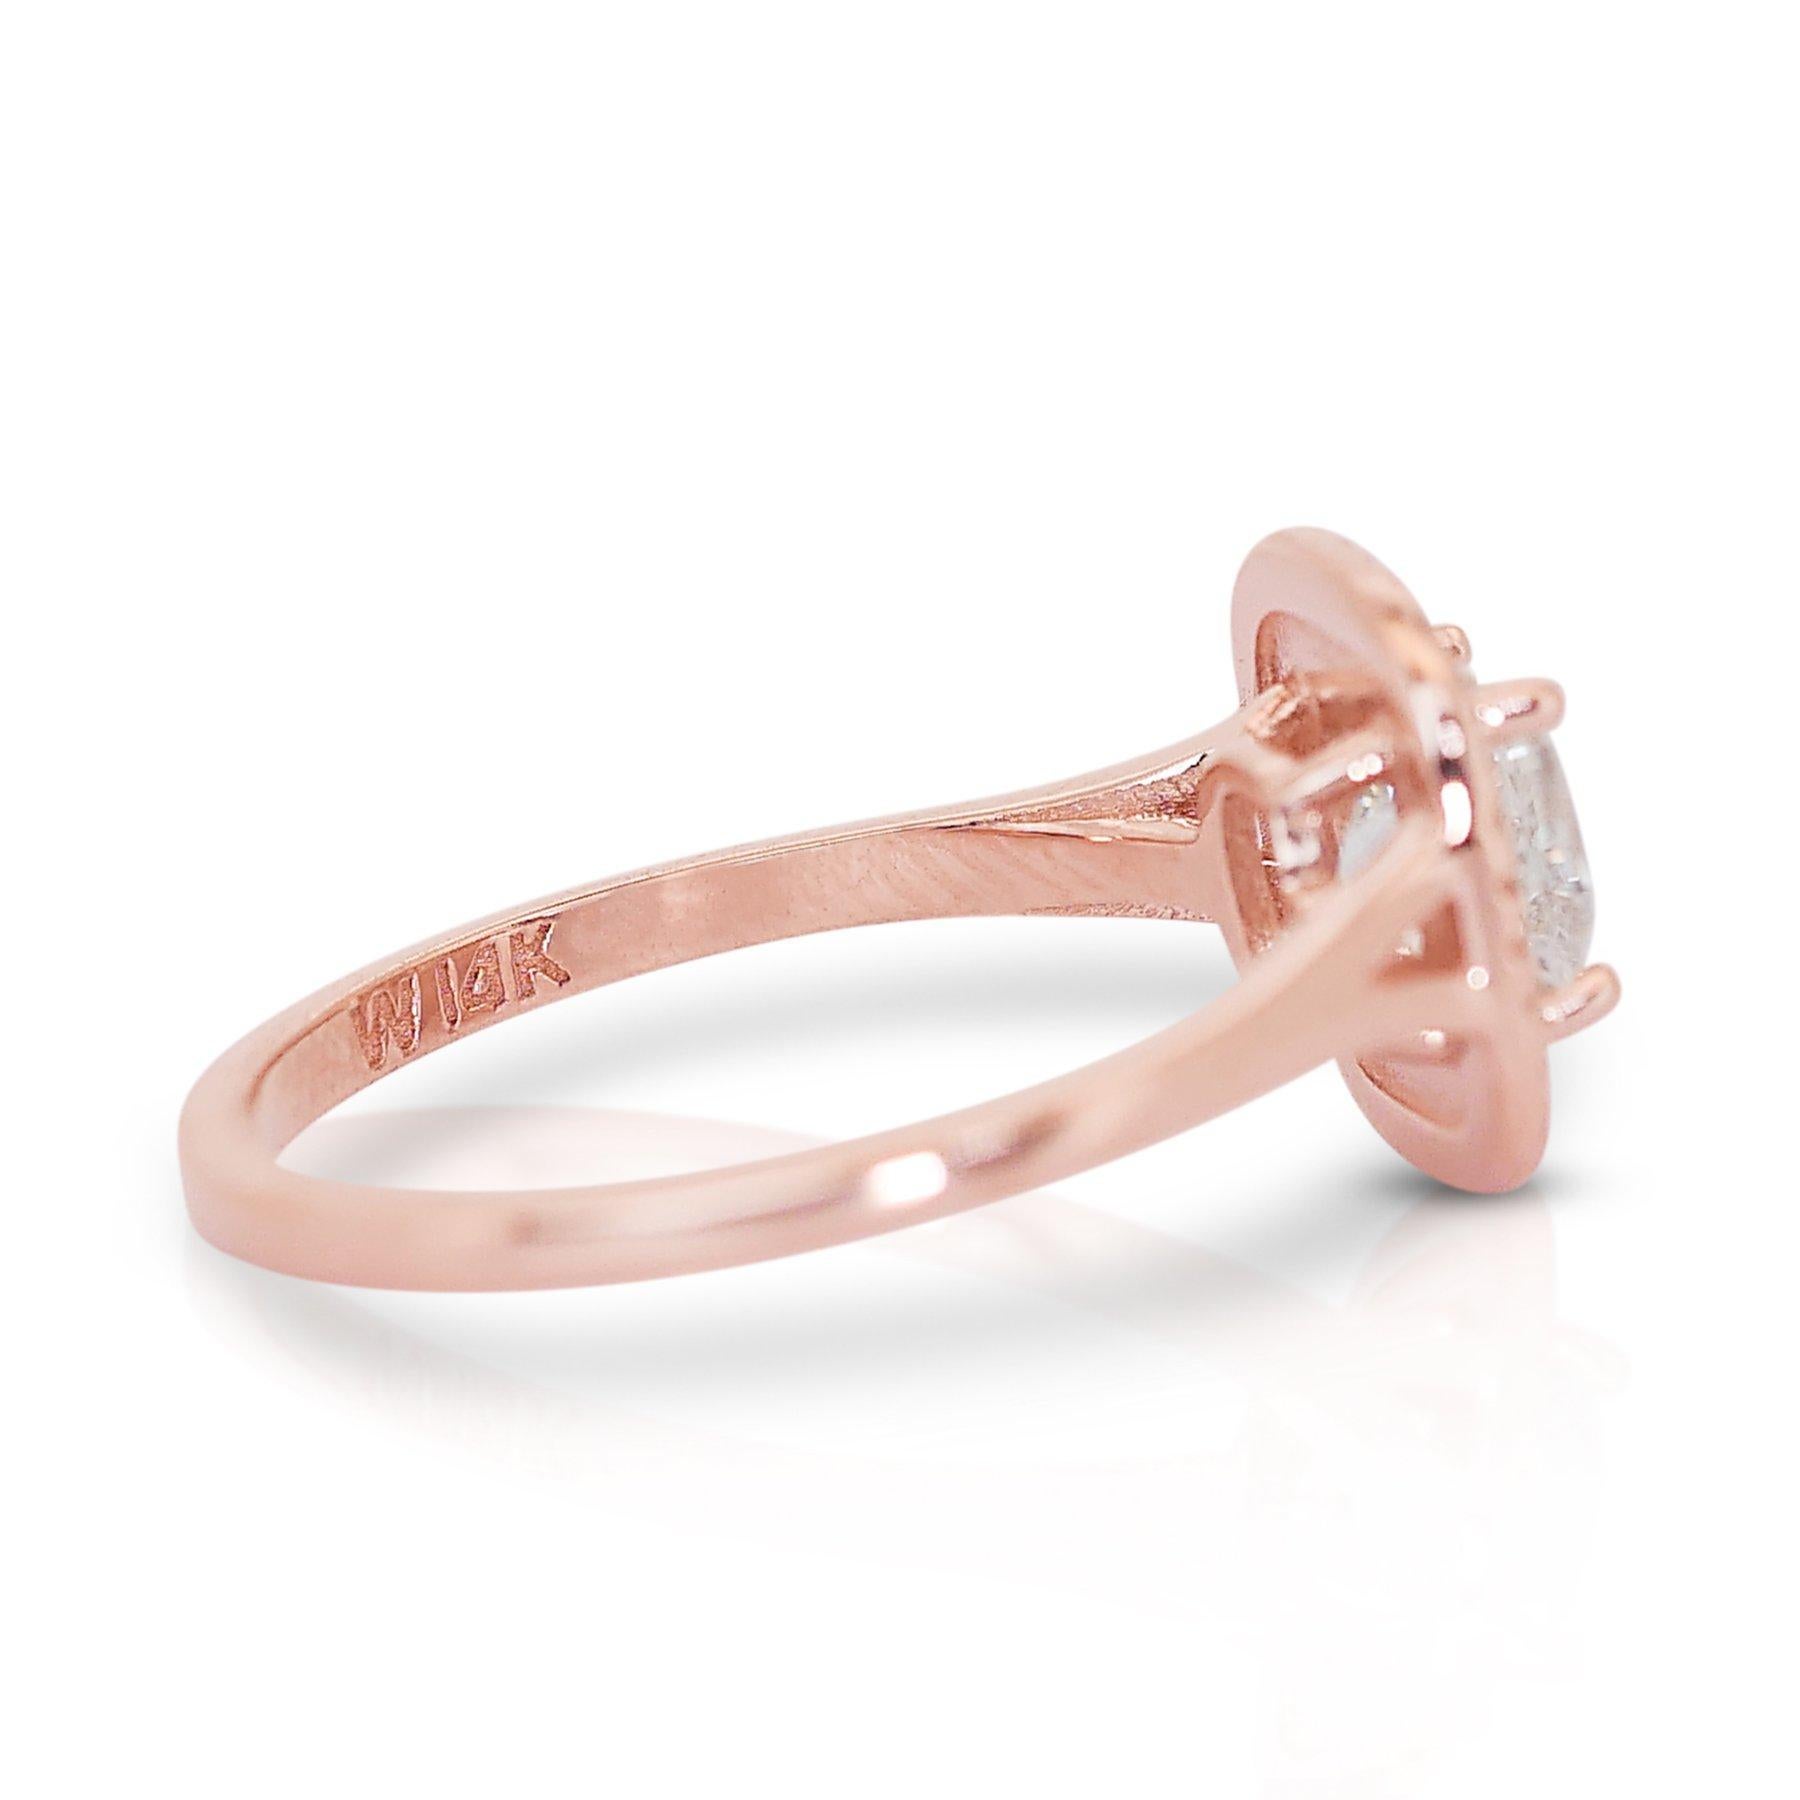 Cushion Cut Elegant 1.41ct Diamonds Double Halo Ring in 18k Rose Gold - GIA Certified For Sale